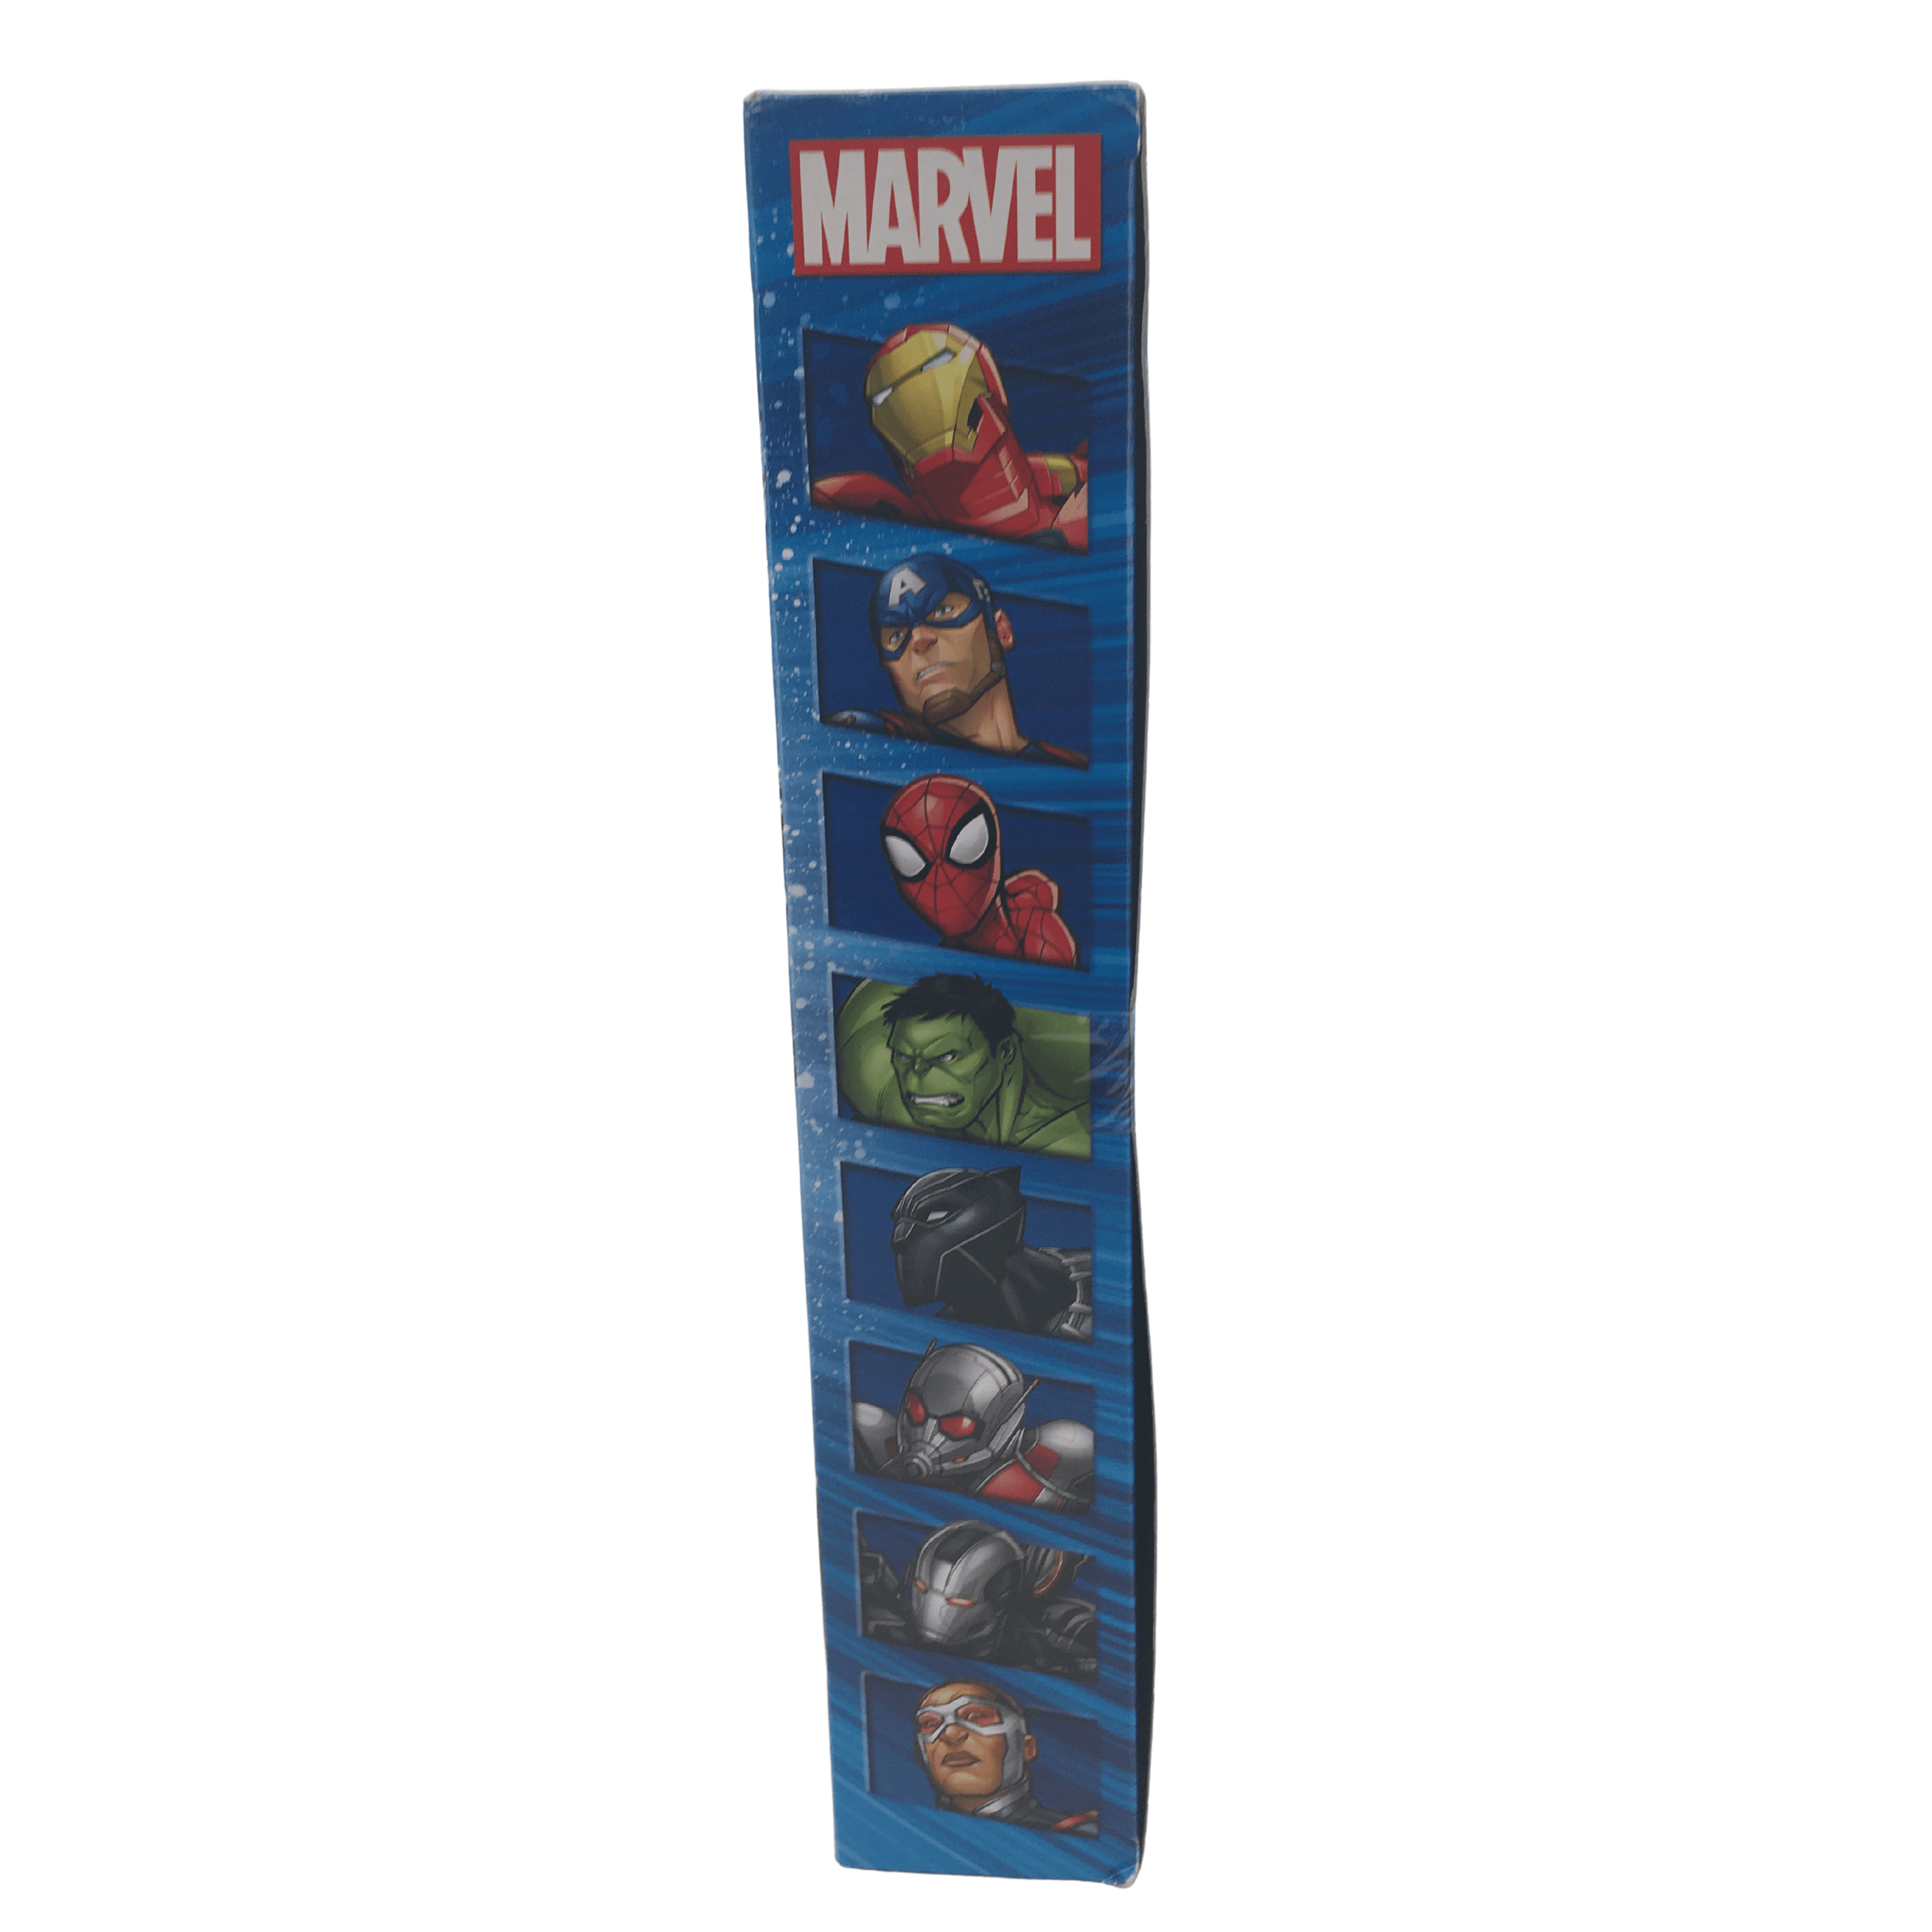 Marvel Avengers Ultimate Protectors Pack with 8 Figures Captain America Iron Man Black Panther Spiderman Antman War Machine Hulk and Falcon